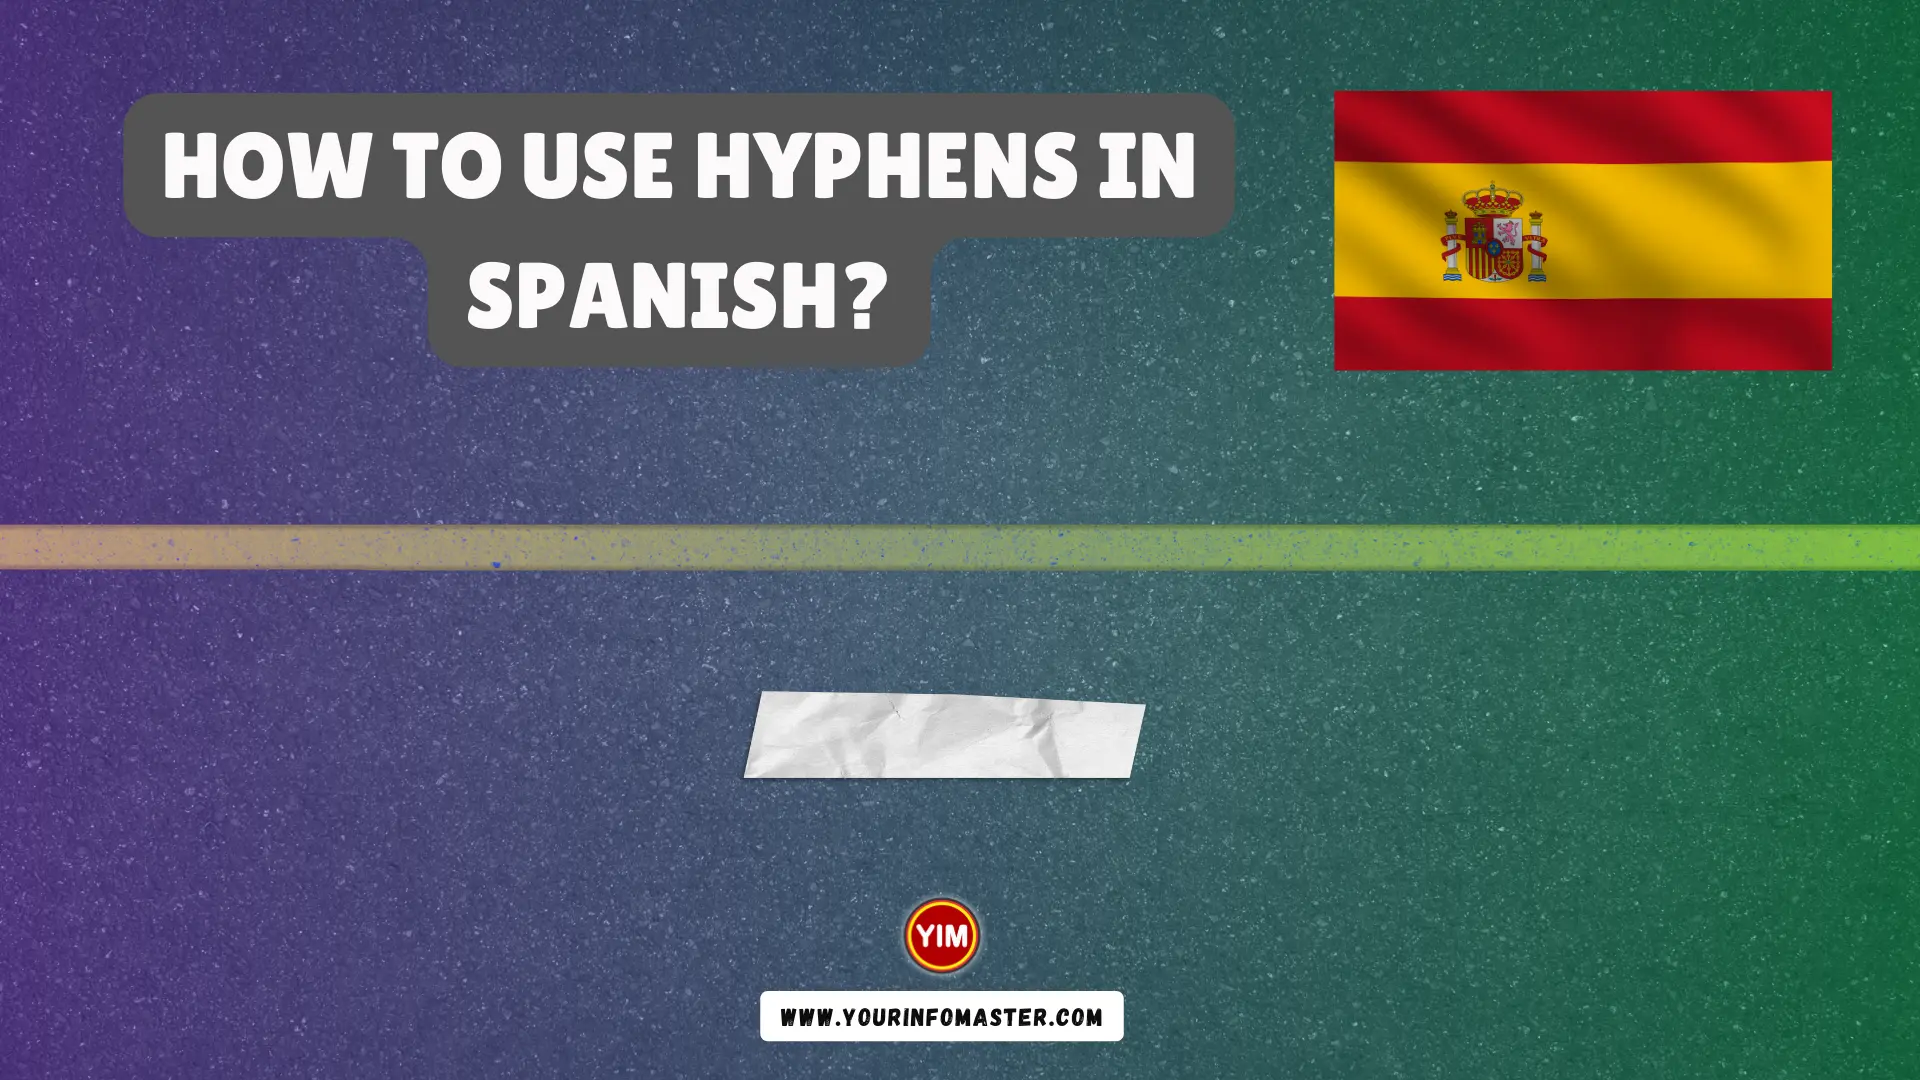 How to Use Hyphens in Spanish